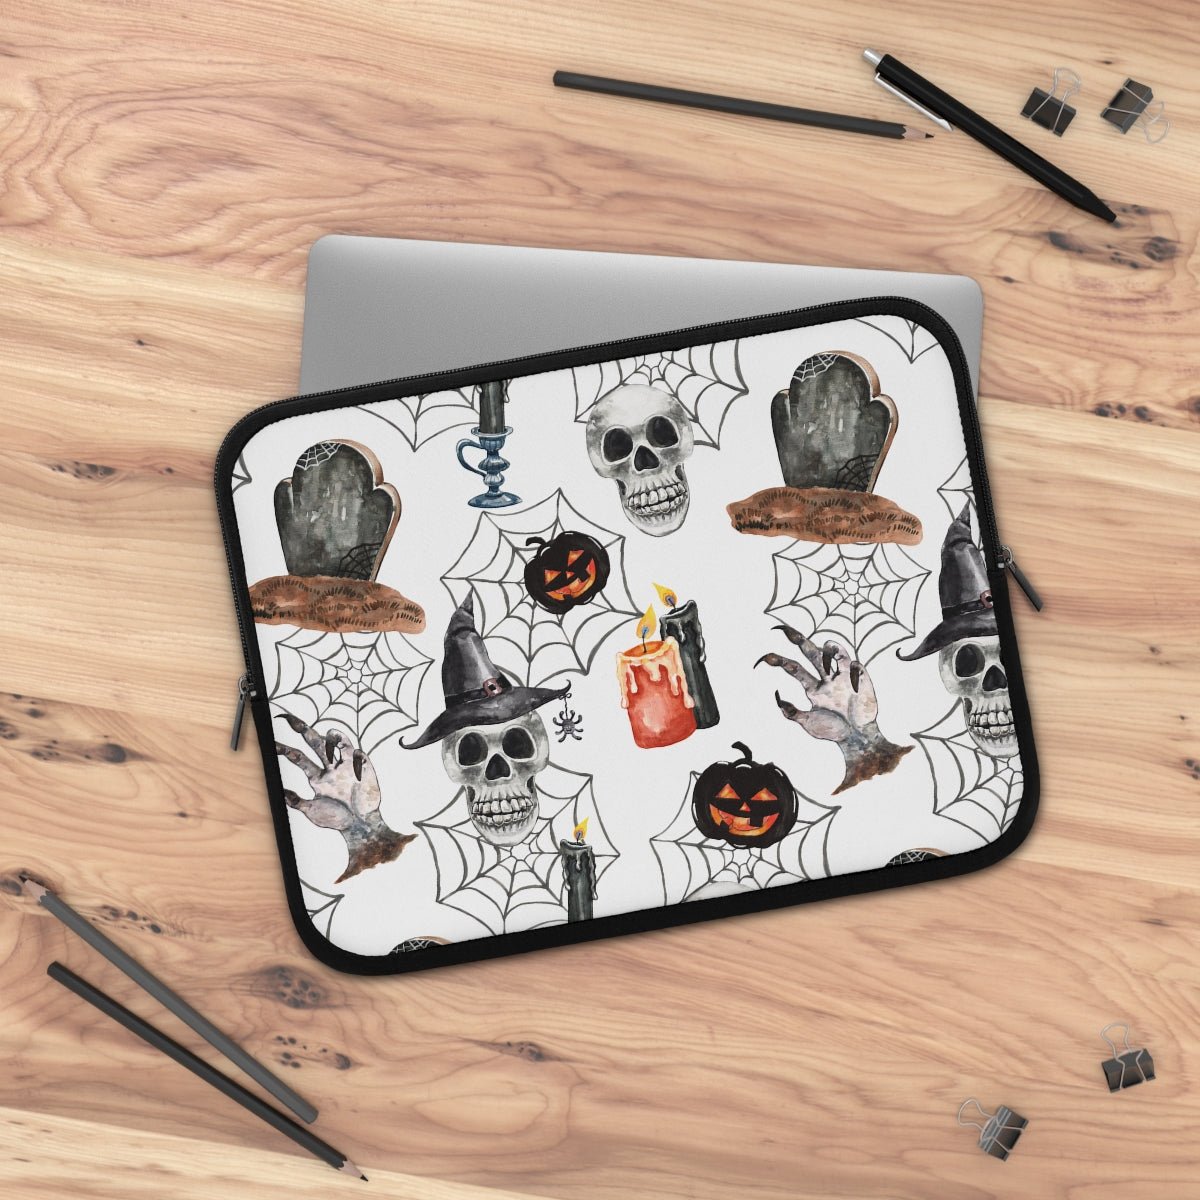 Skulls and Pumpkins Laptop Sleeve - Puffin Lime